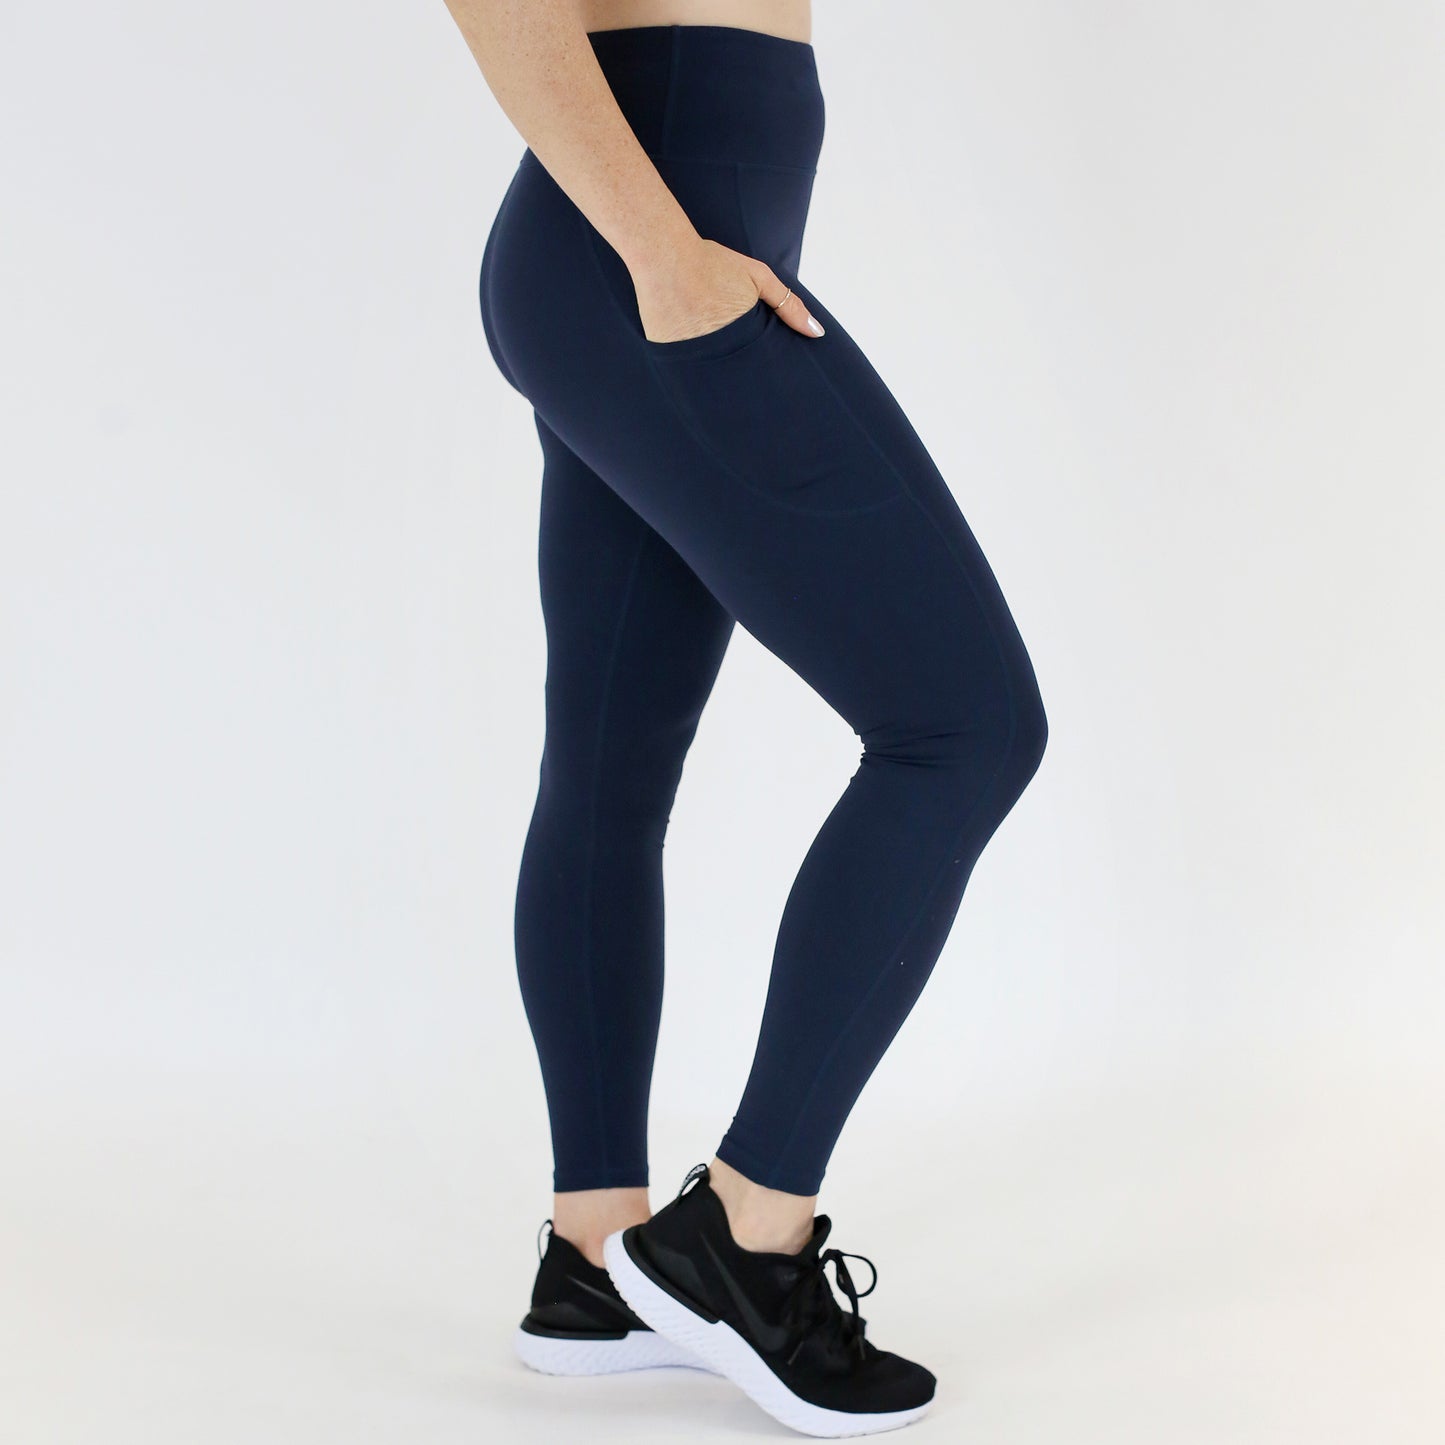 Life League Gear - Women's Leggings with Pockets - Blue Coral